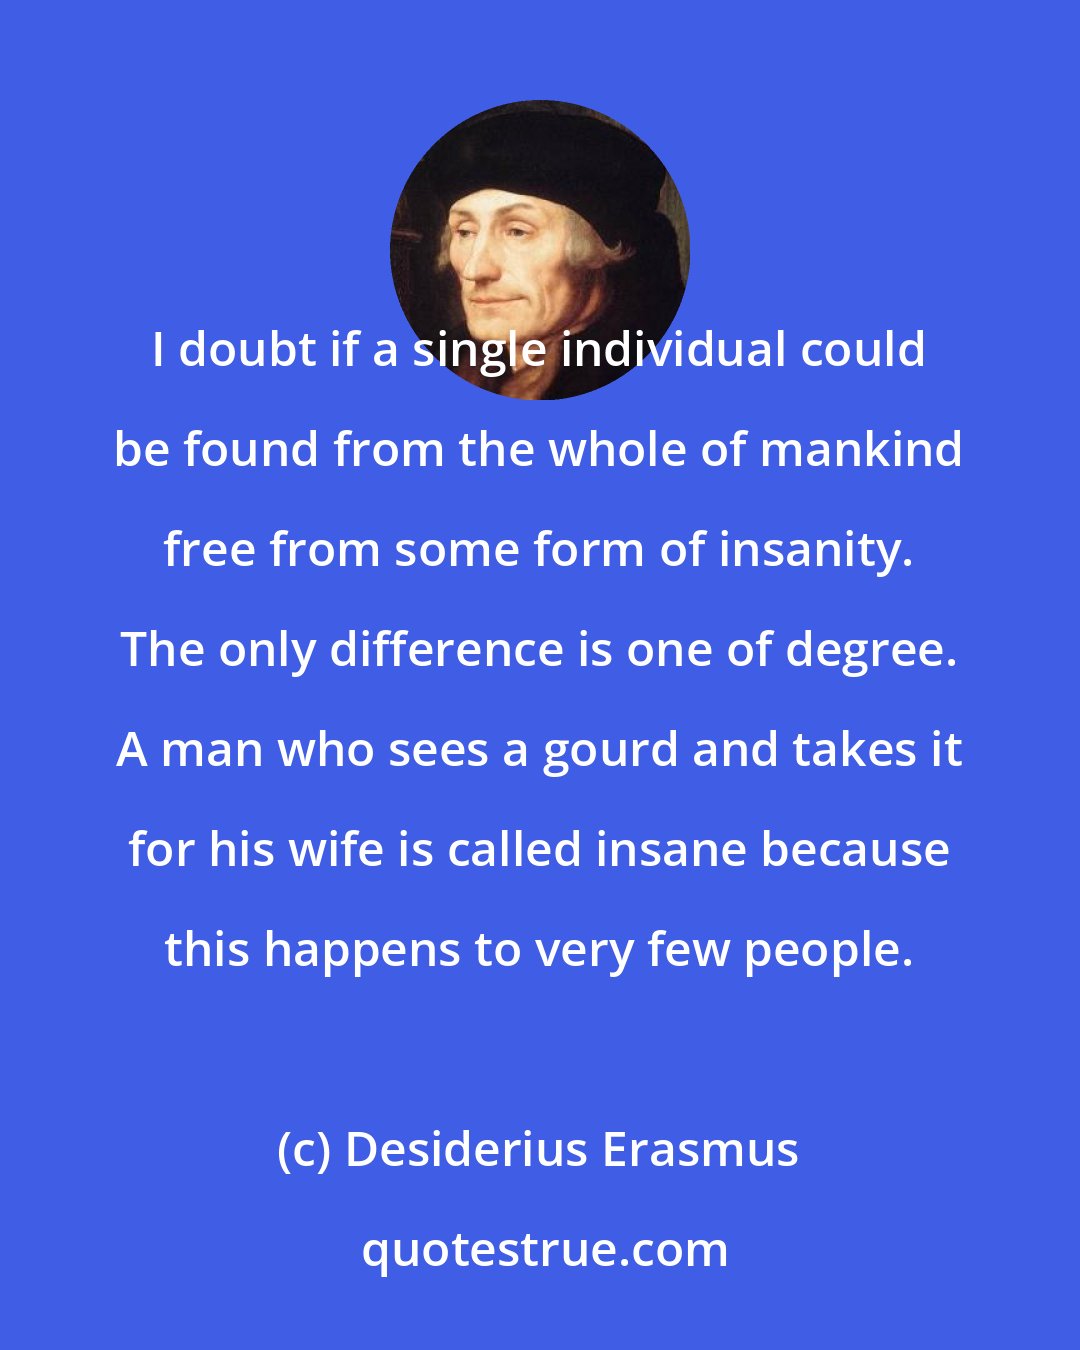 Desiderius Erasmus: I doubt if a single individual could be found from the whole of mankind free from some form of insanity. The only difference is one of degree. A man who sees a gourd and takes it for his wife is called insane because this happens to very few people.